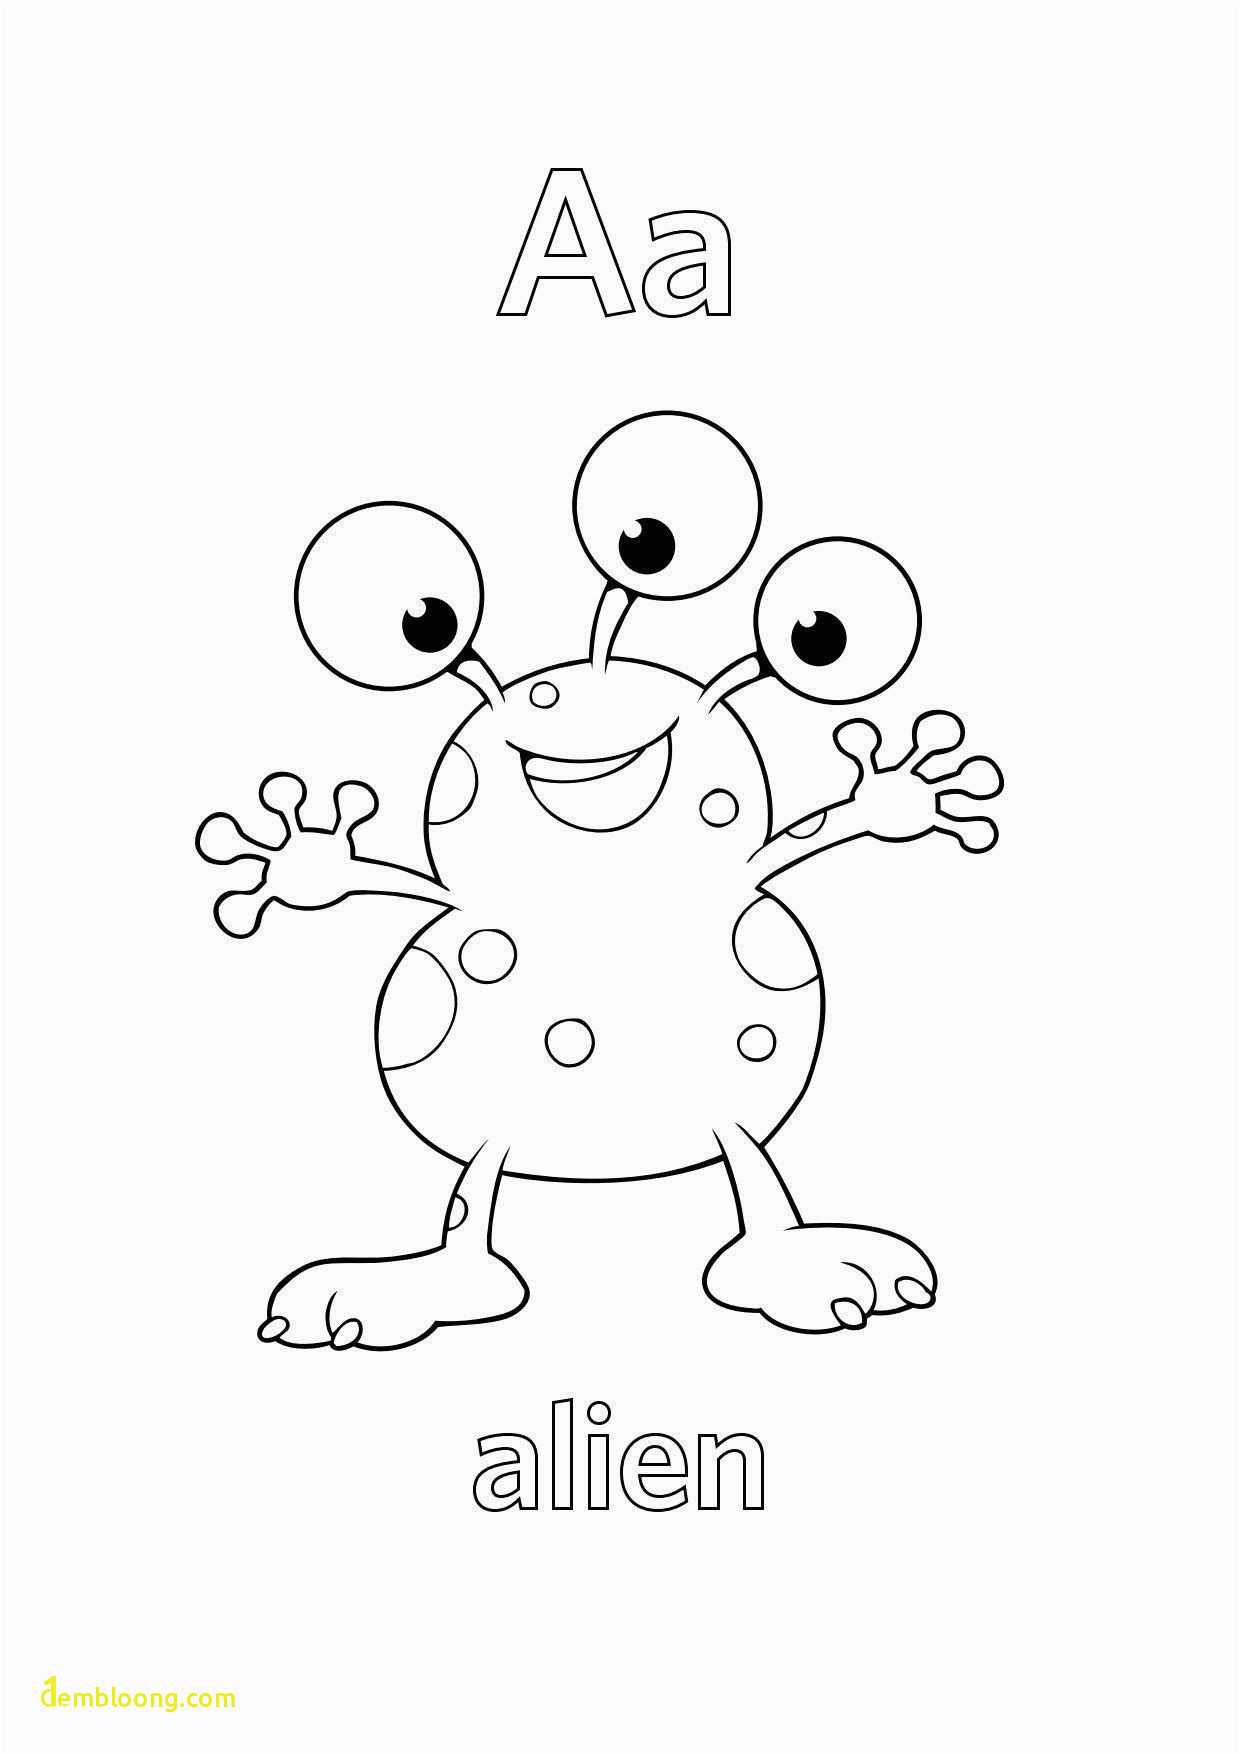 alphabet coloring pages for toddlers new coloring pages free frozen coloring pages coloring pagess of alphabet coloring pages for toddlers